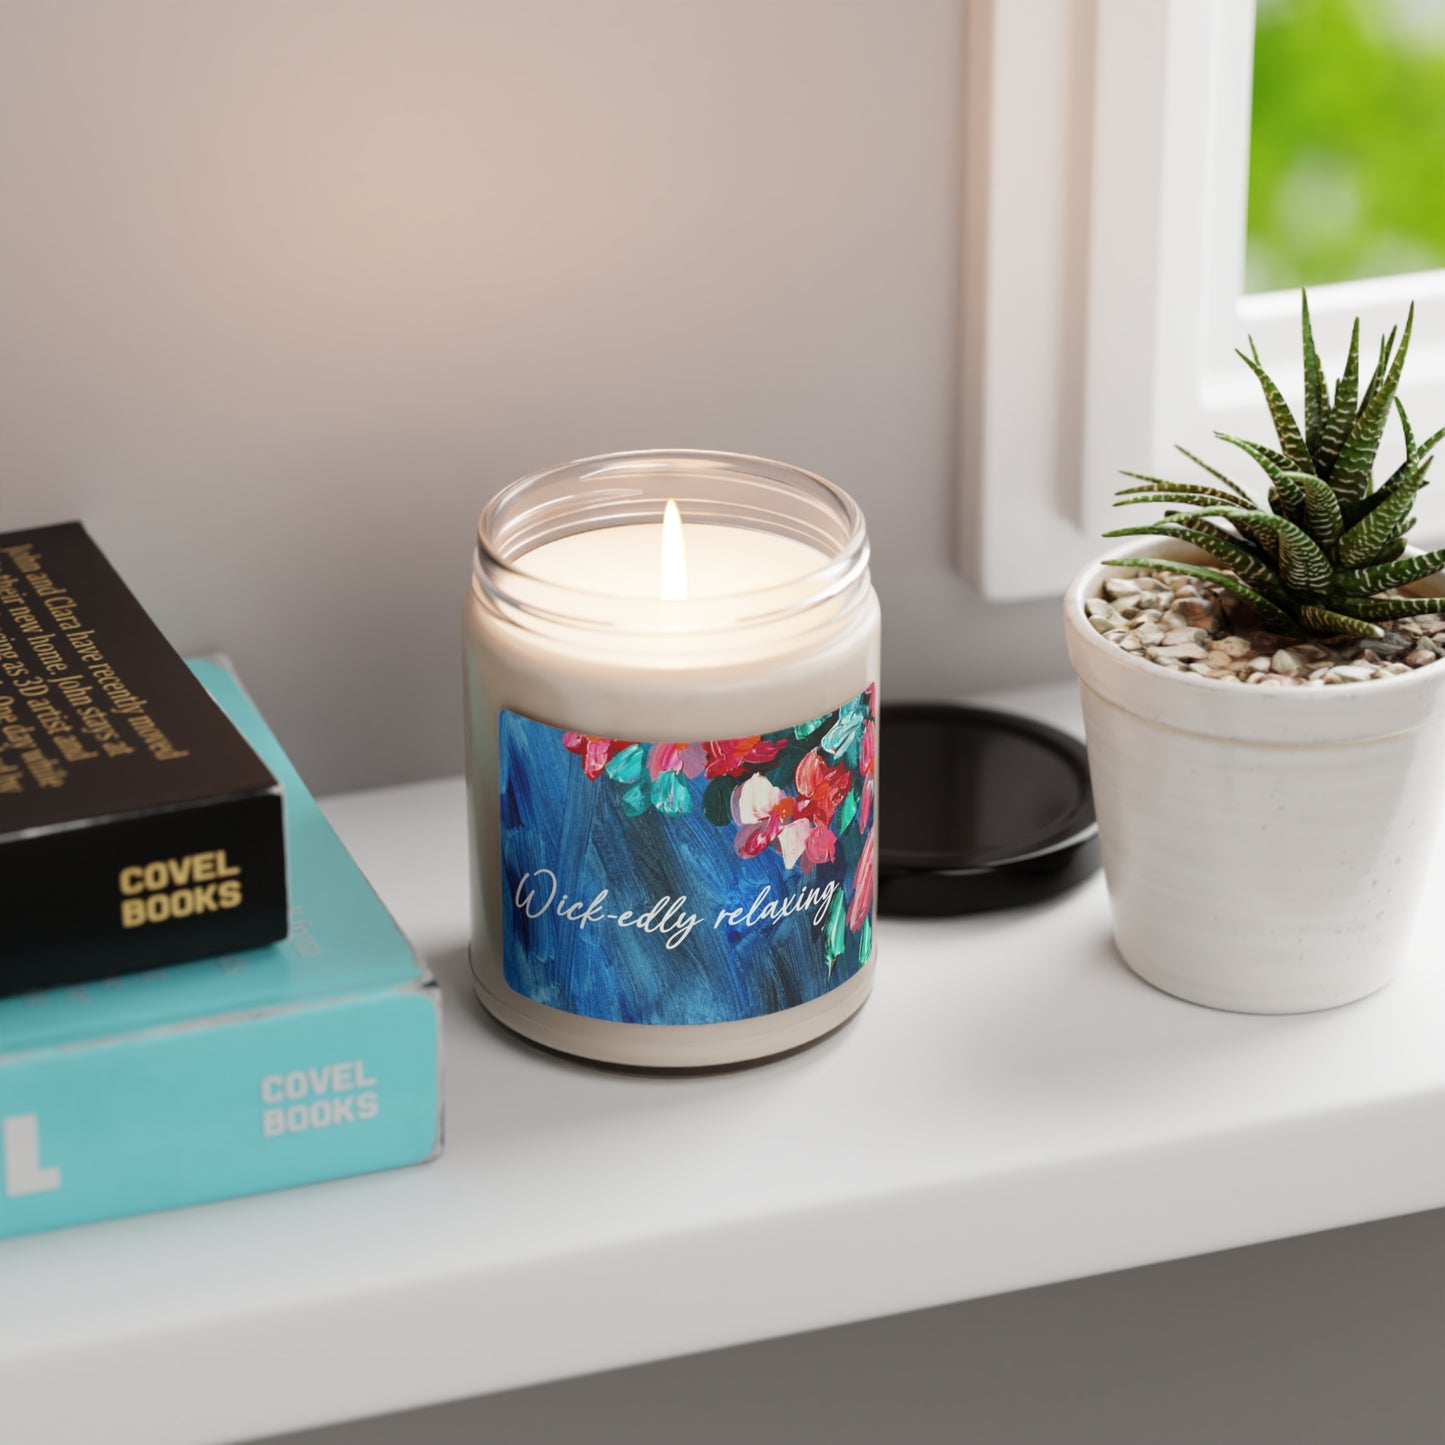 Scented Soy Candle "Wick-edly relaxing"